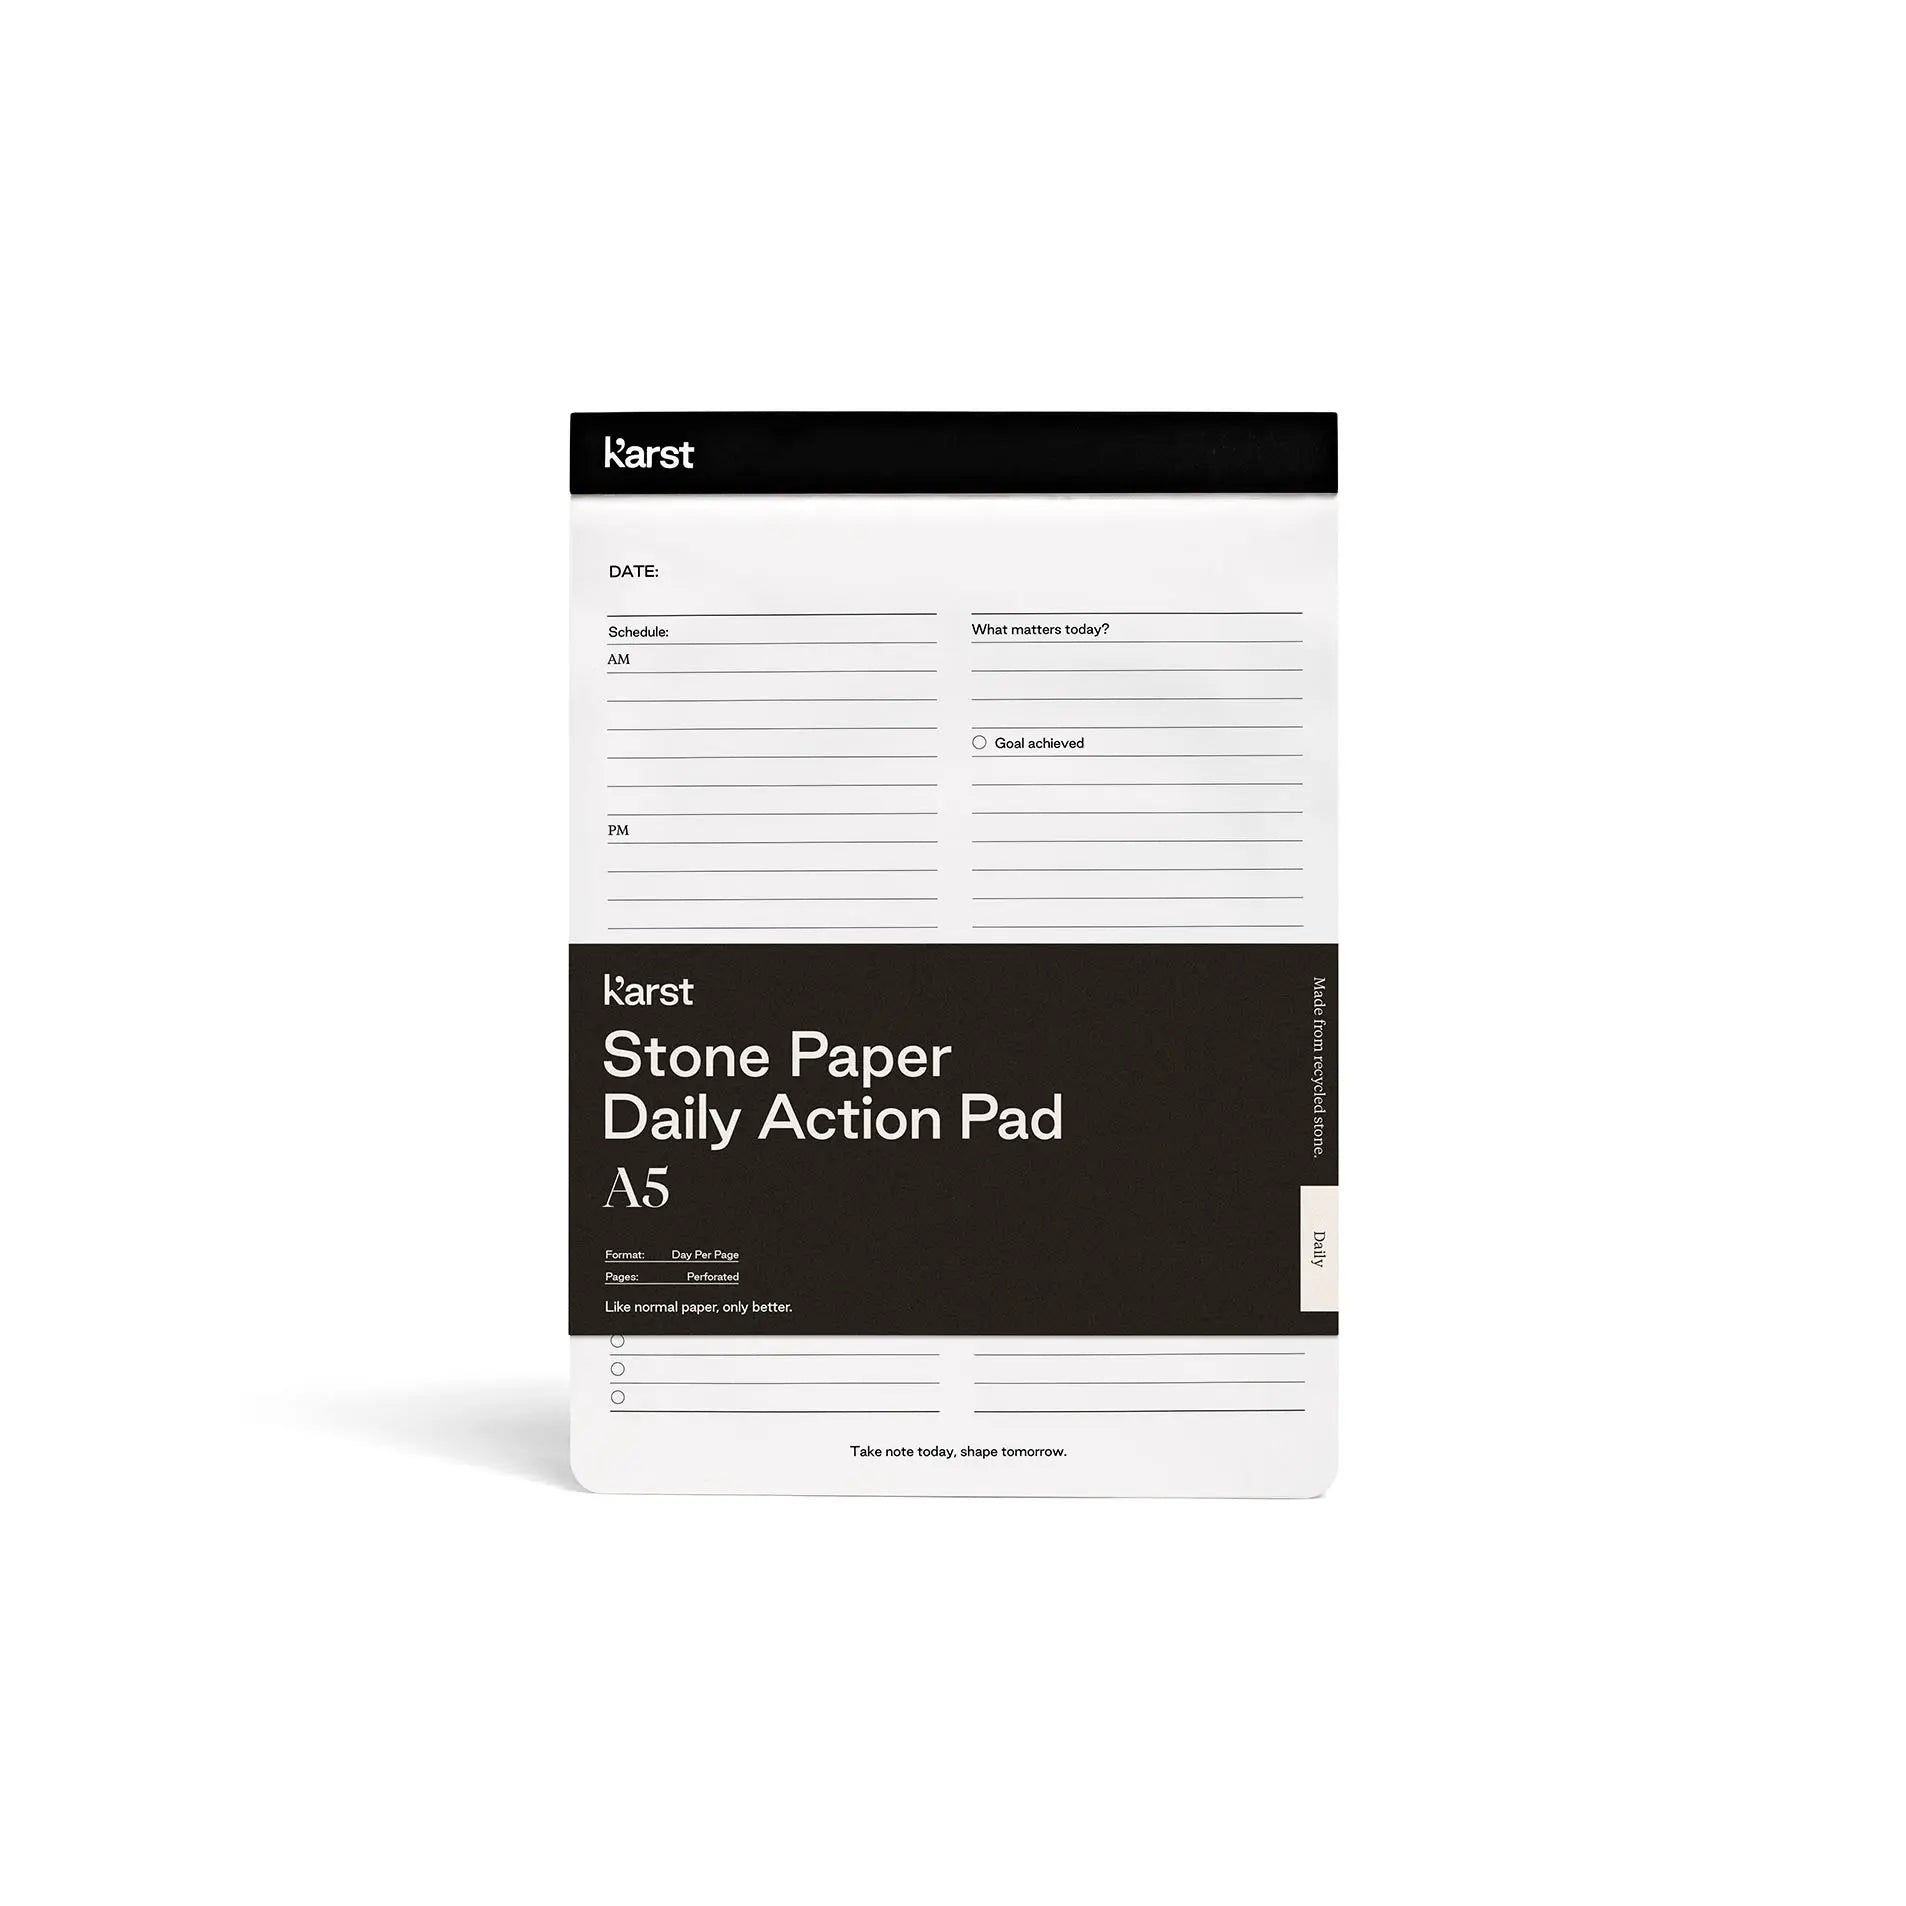 Stone Paper Daily Action Pad